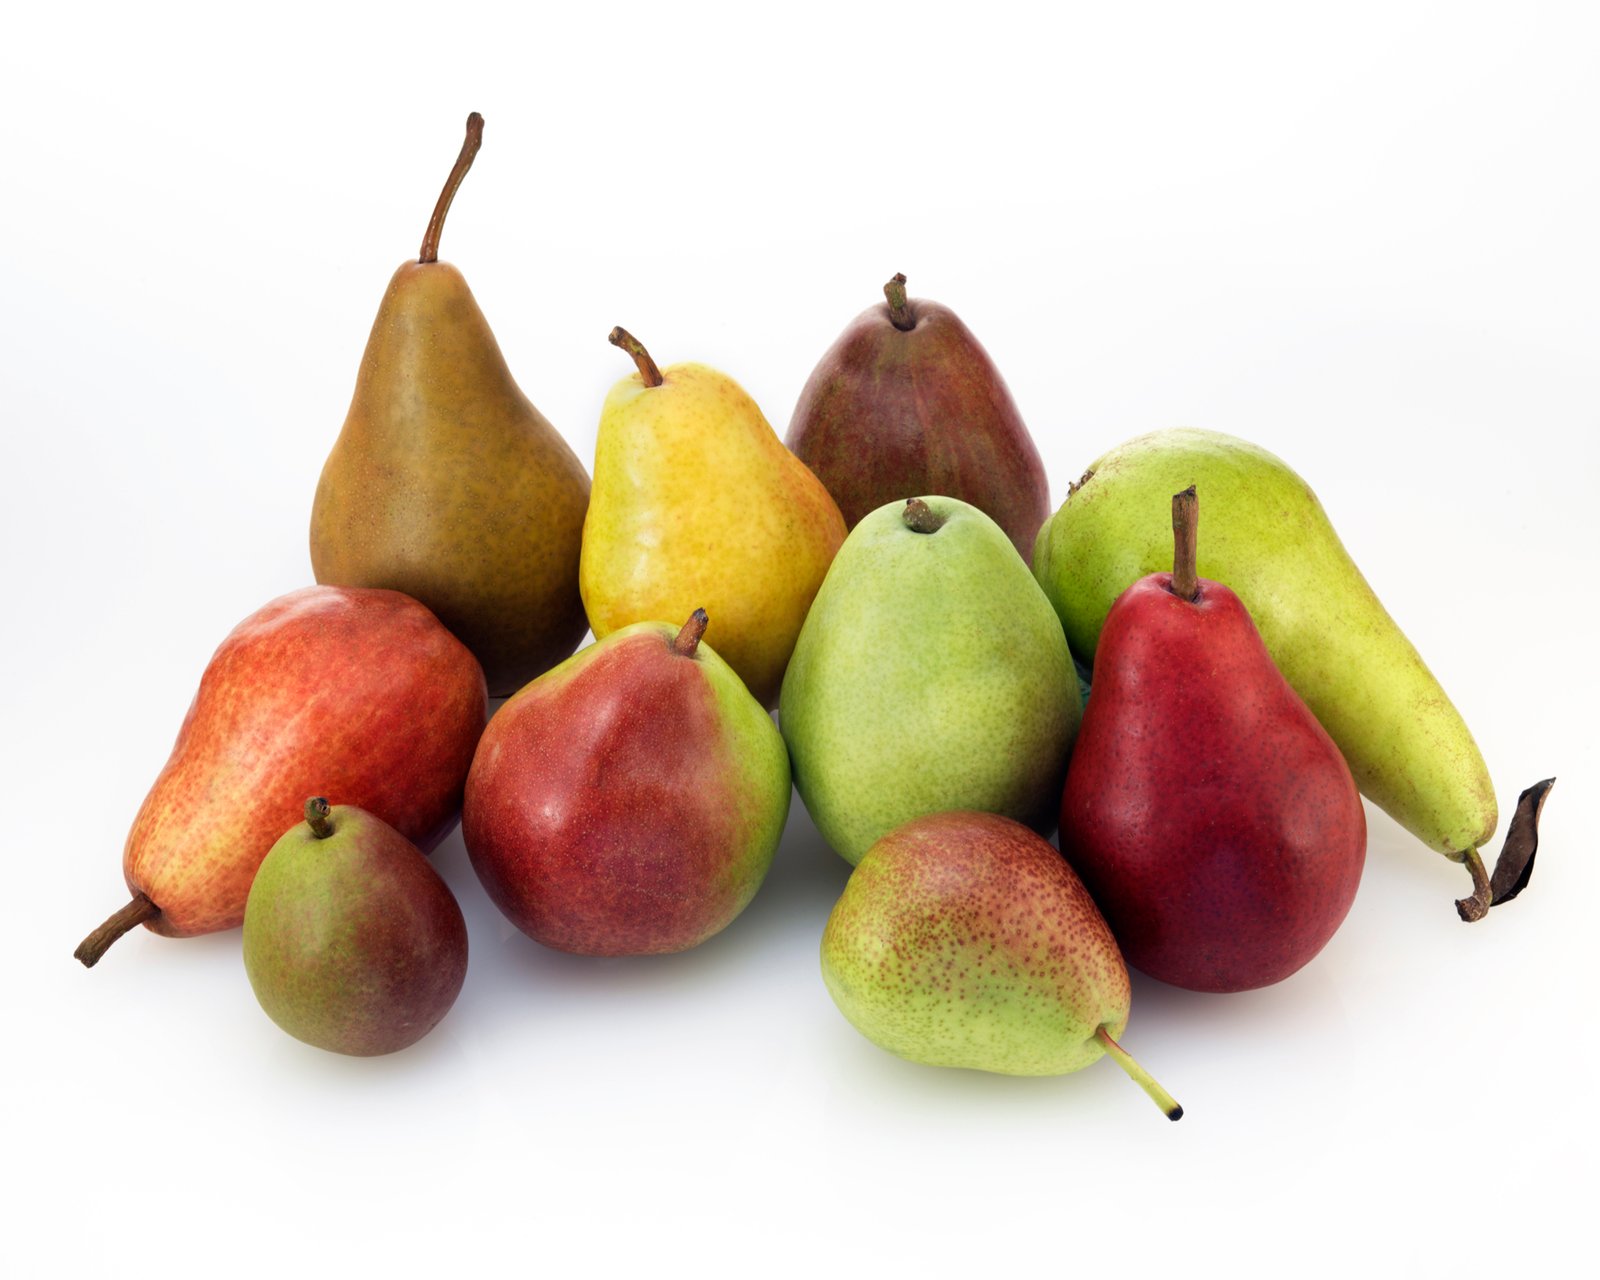 usa-pears-to-drive-health-awareness-in-india